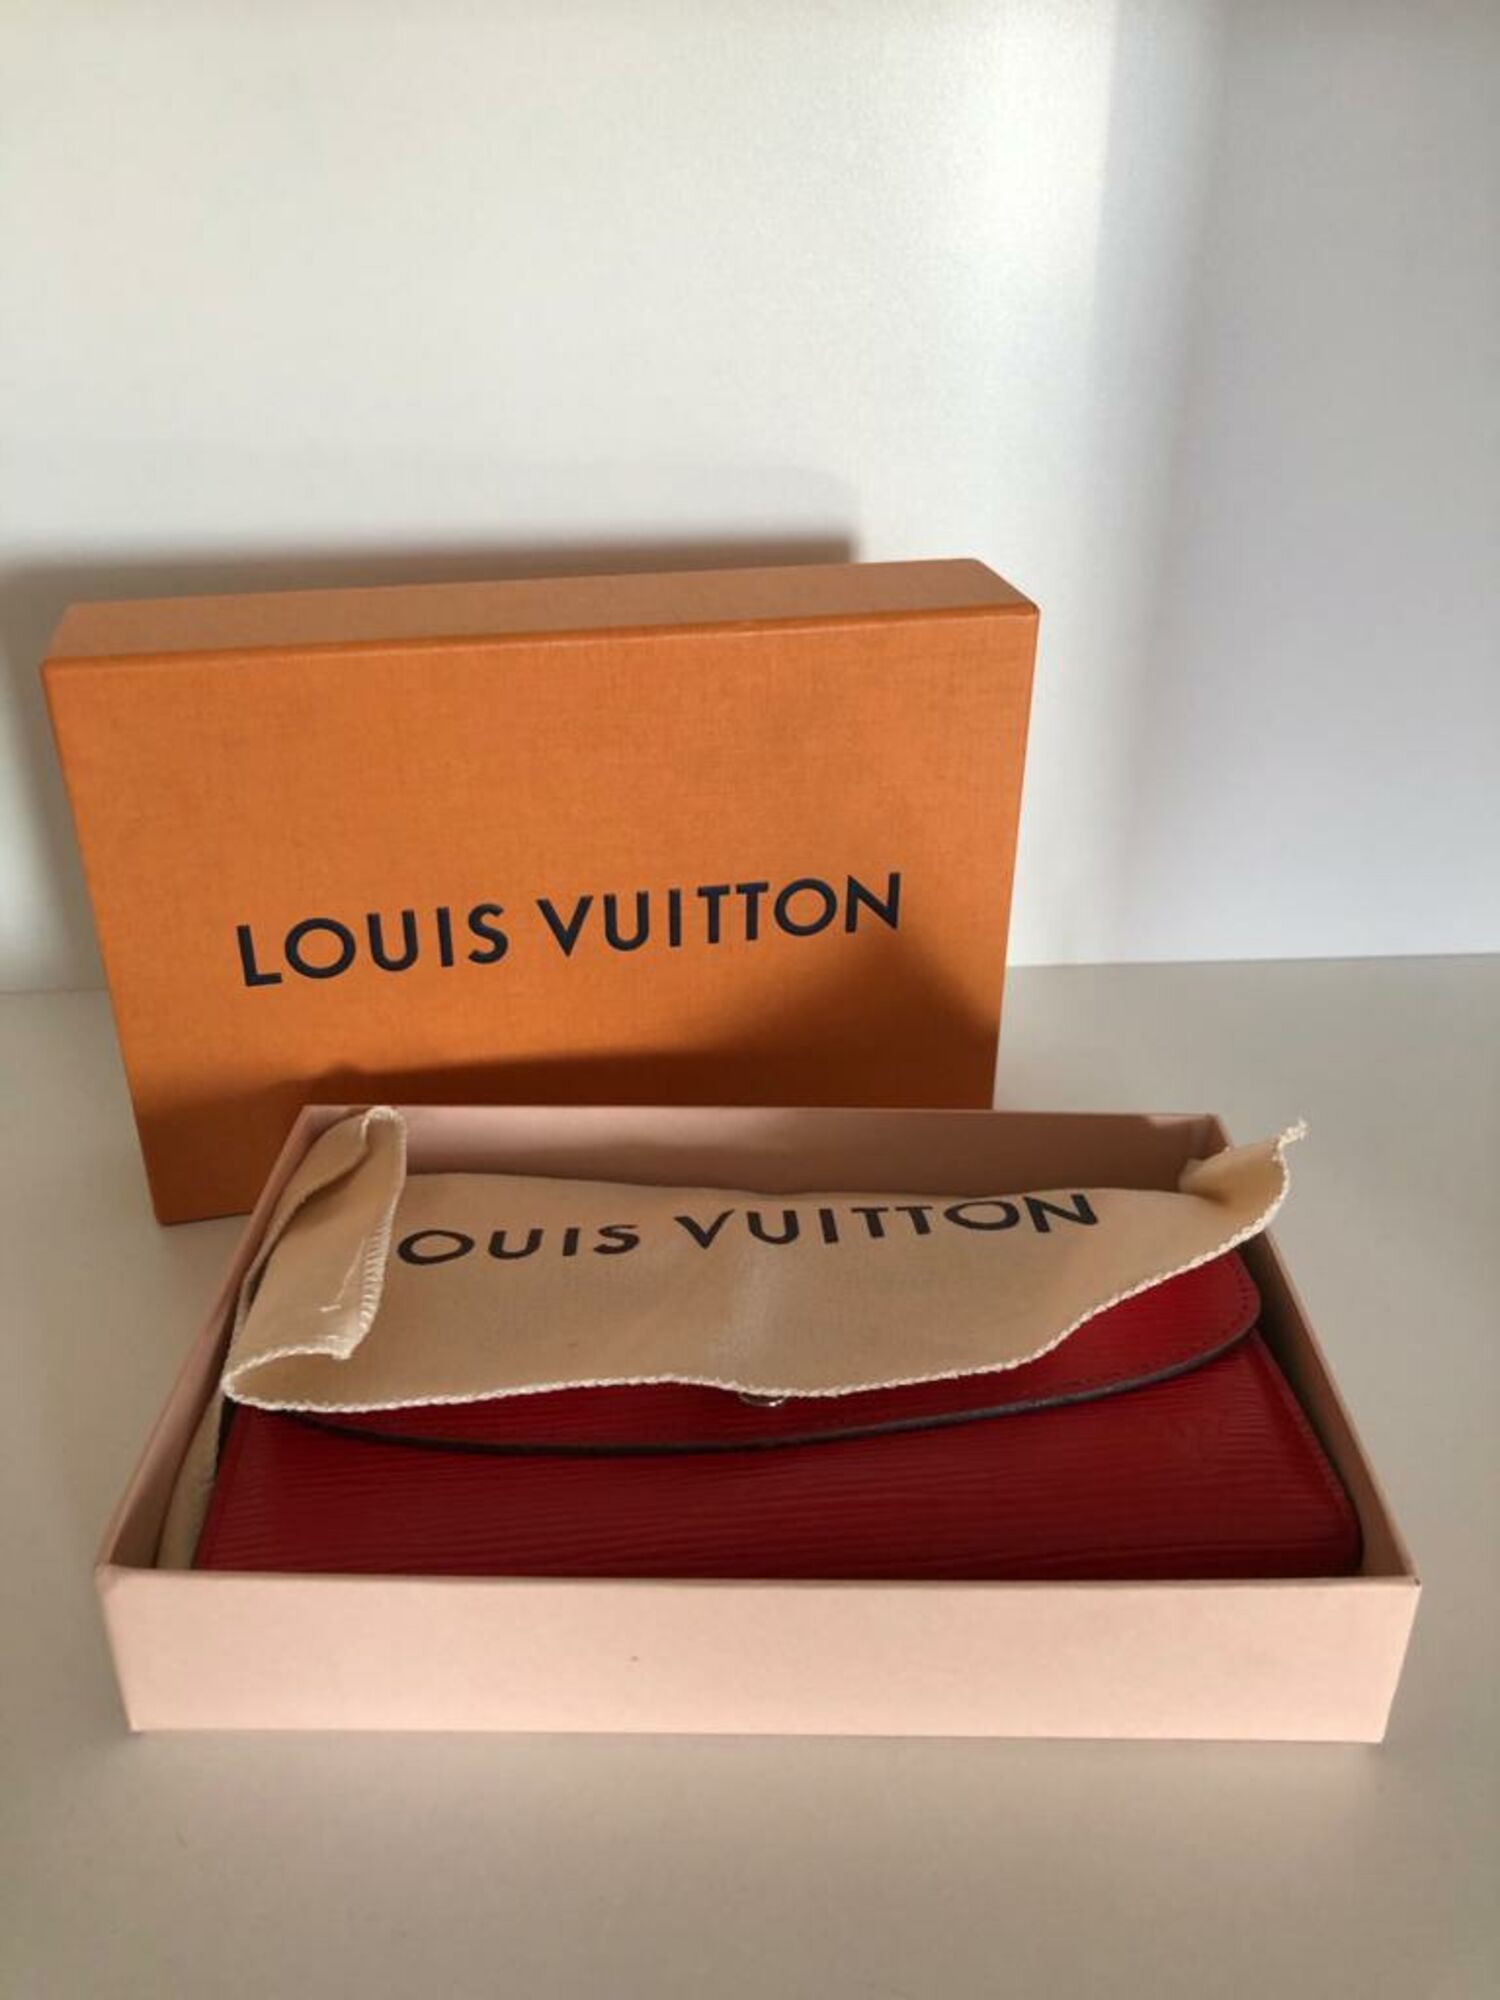 Leather Wallet Louis Vuitton, buy pre-owned at 200 EUR